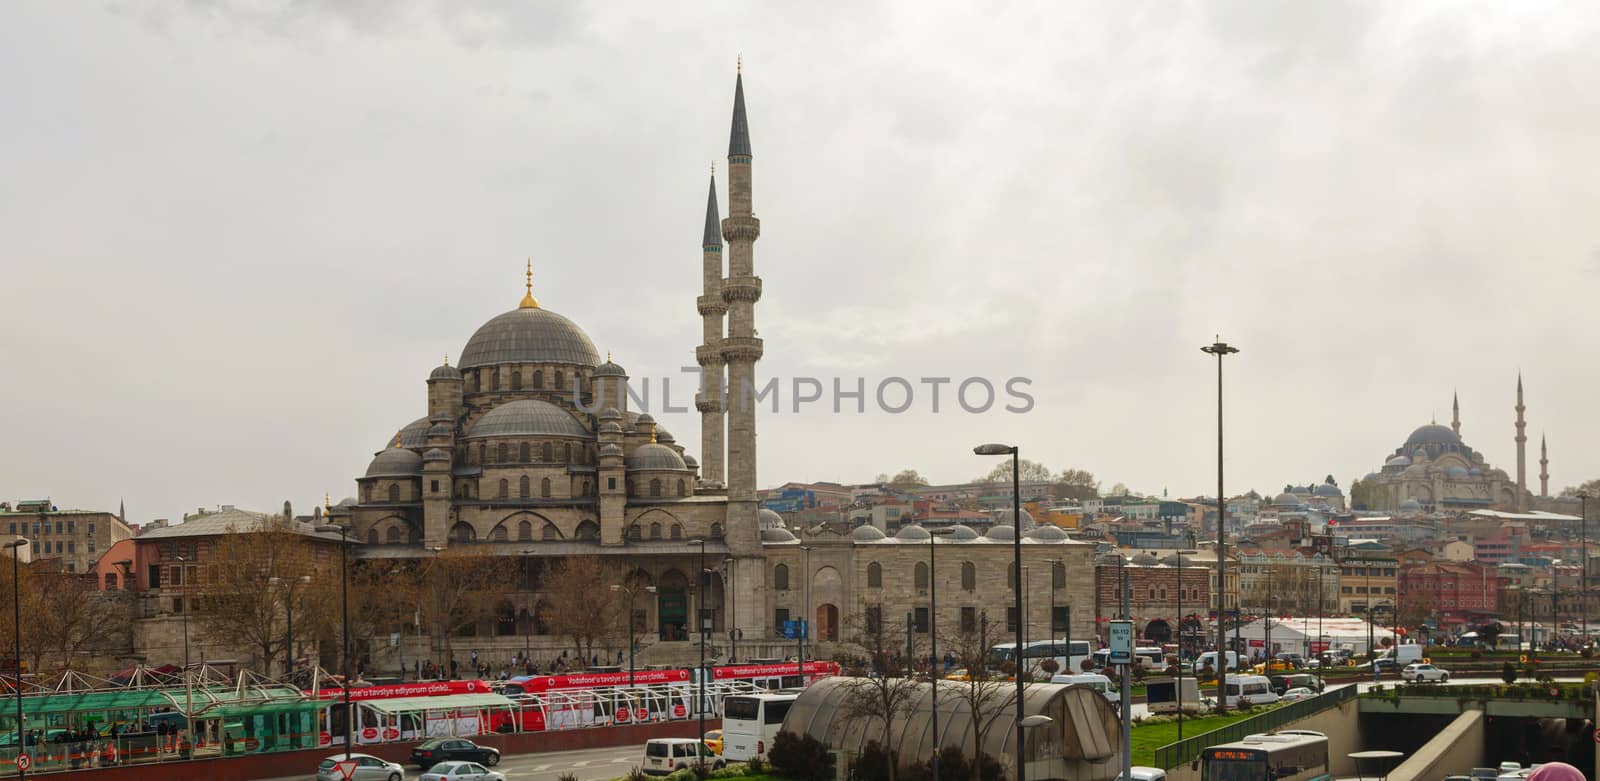 Yeni Cami (The New Mosque) in Istanbul by AndreyKr